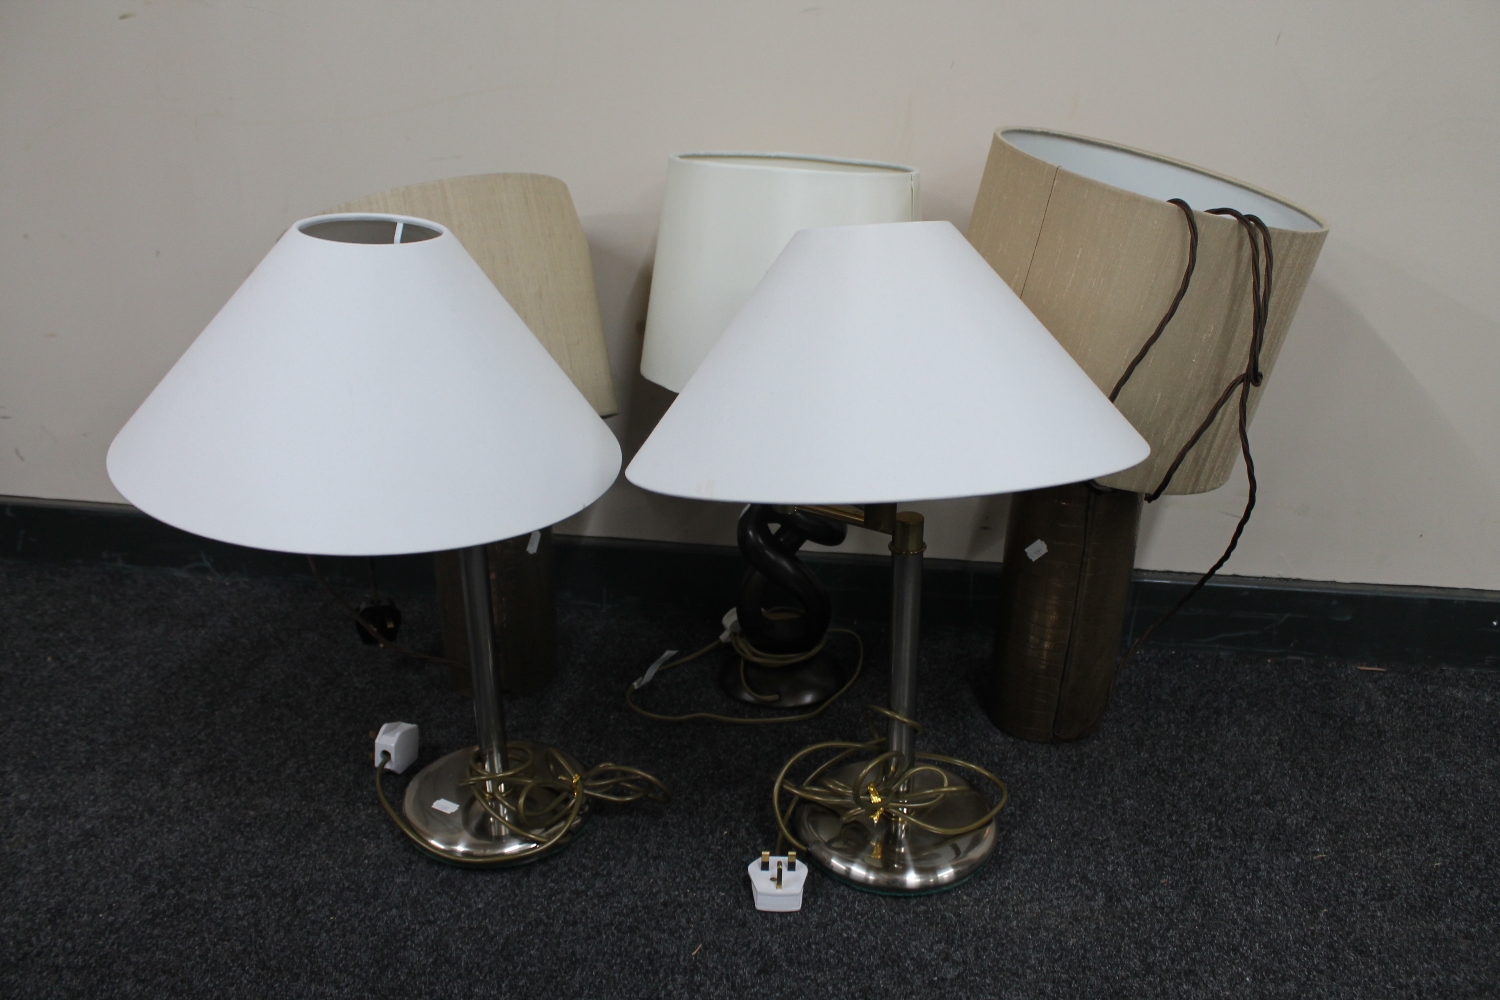 Two pairs of contemporary table lamps together with another table lamp